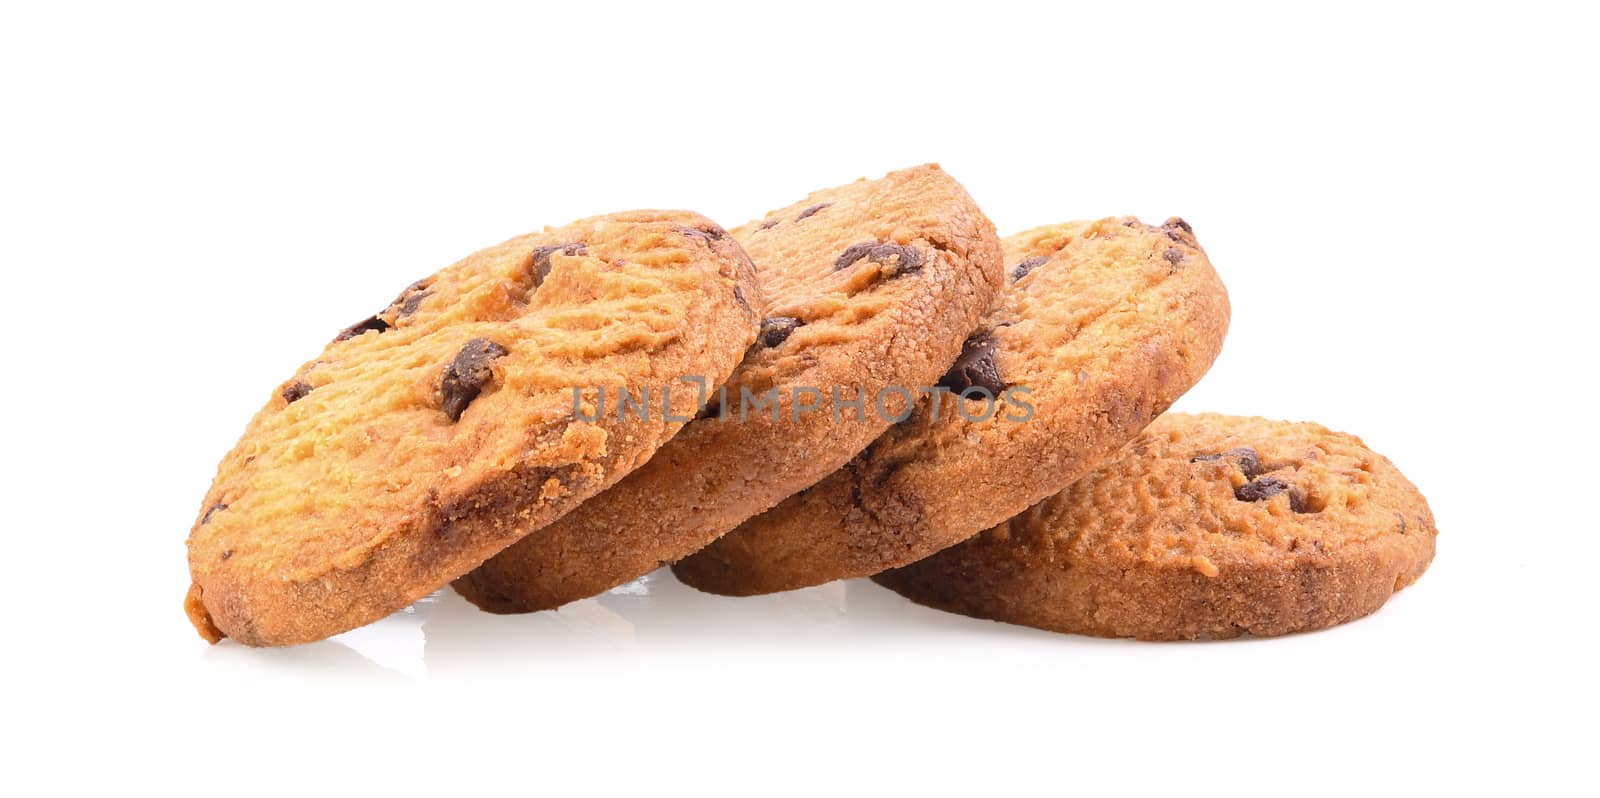 chocolate chip cookies on white background